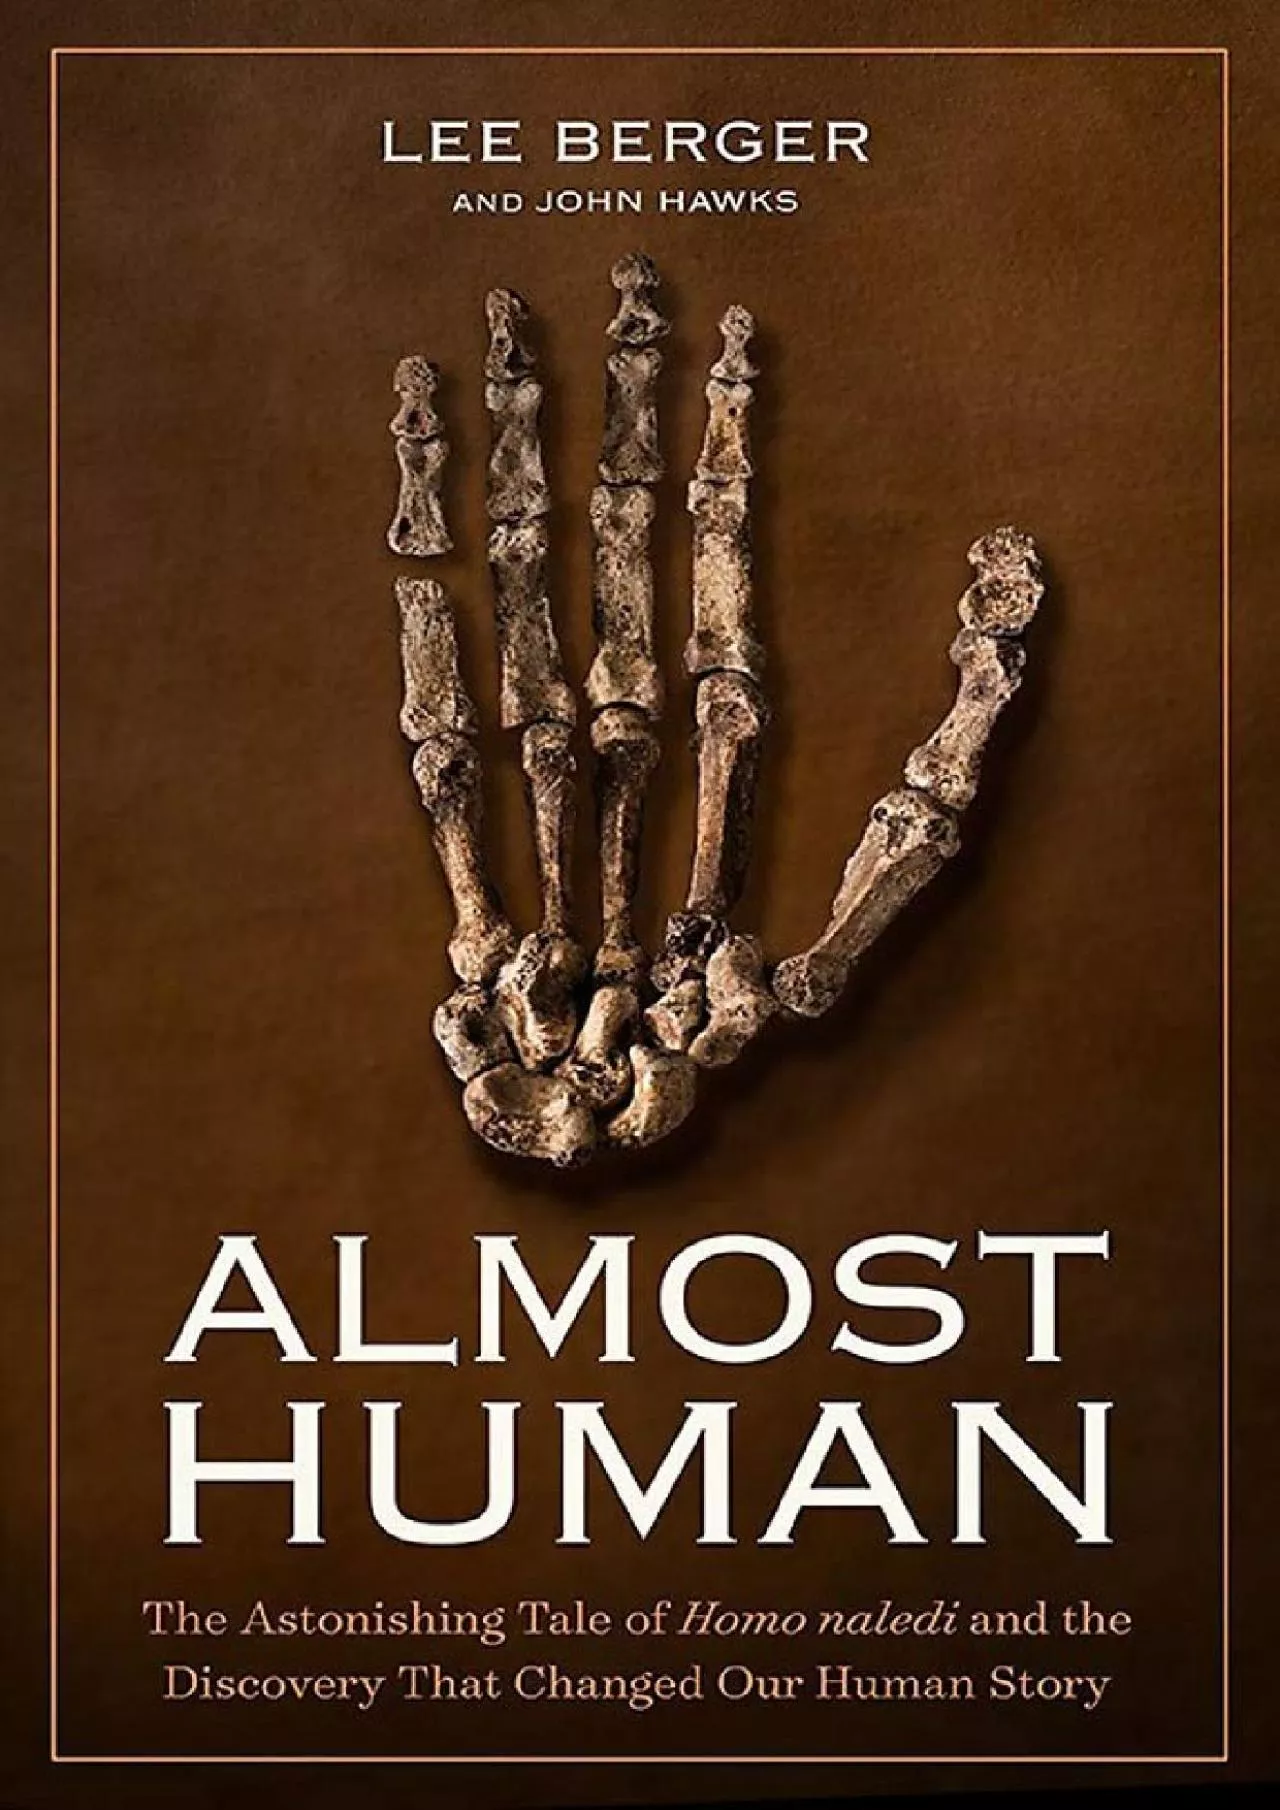 (BOOK)-Almost Human: The Astonishing Tale of Homo naledi and the Discovery That Changed